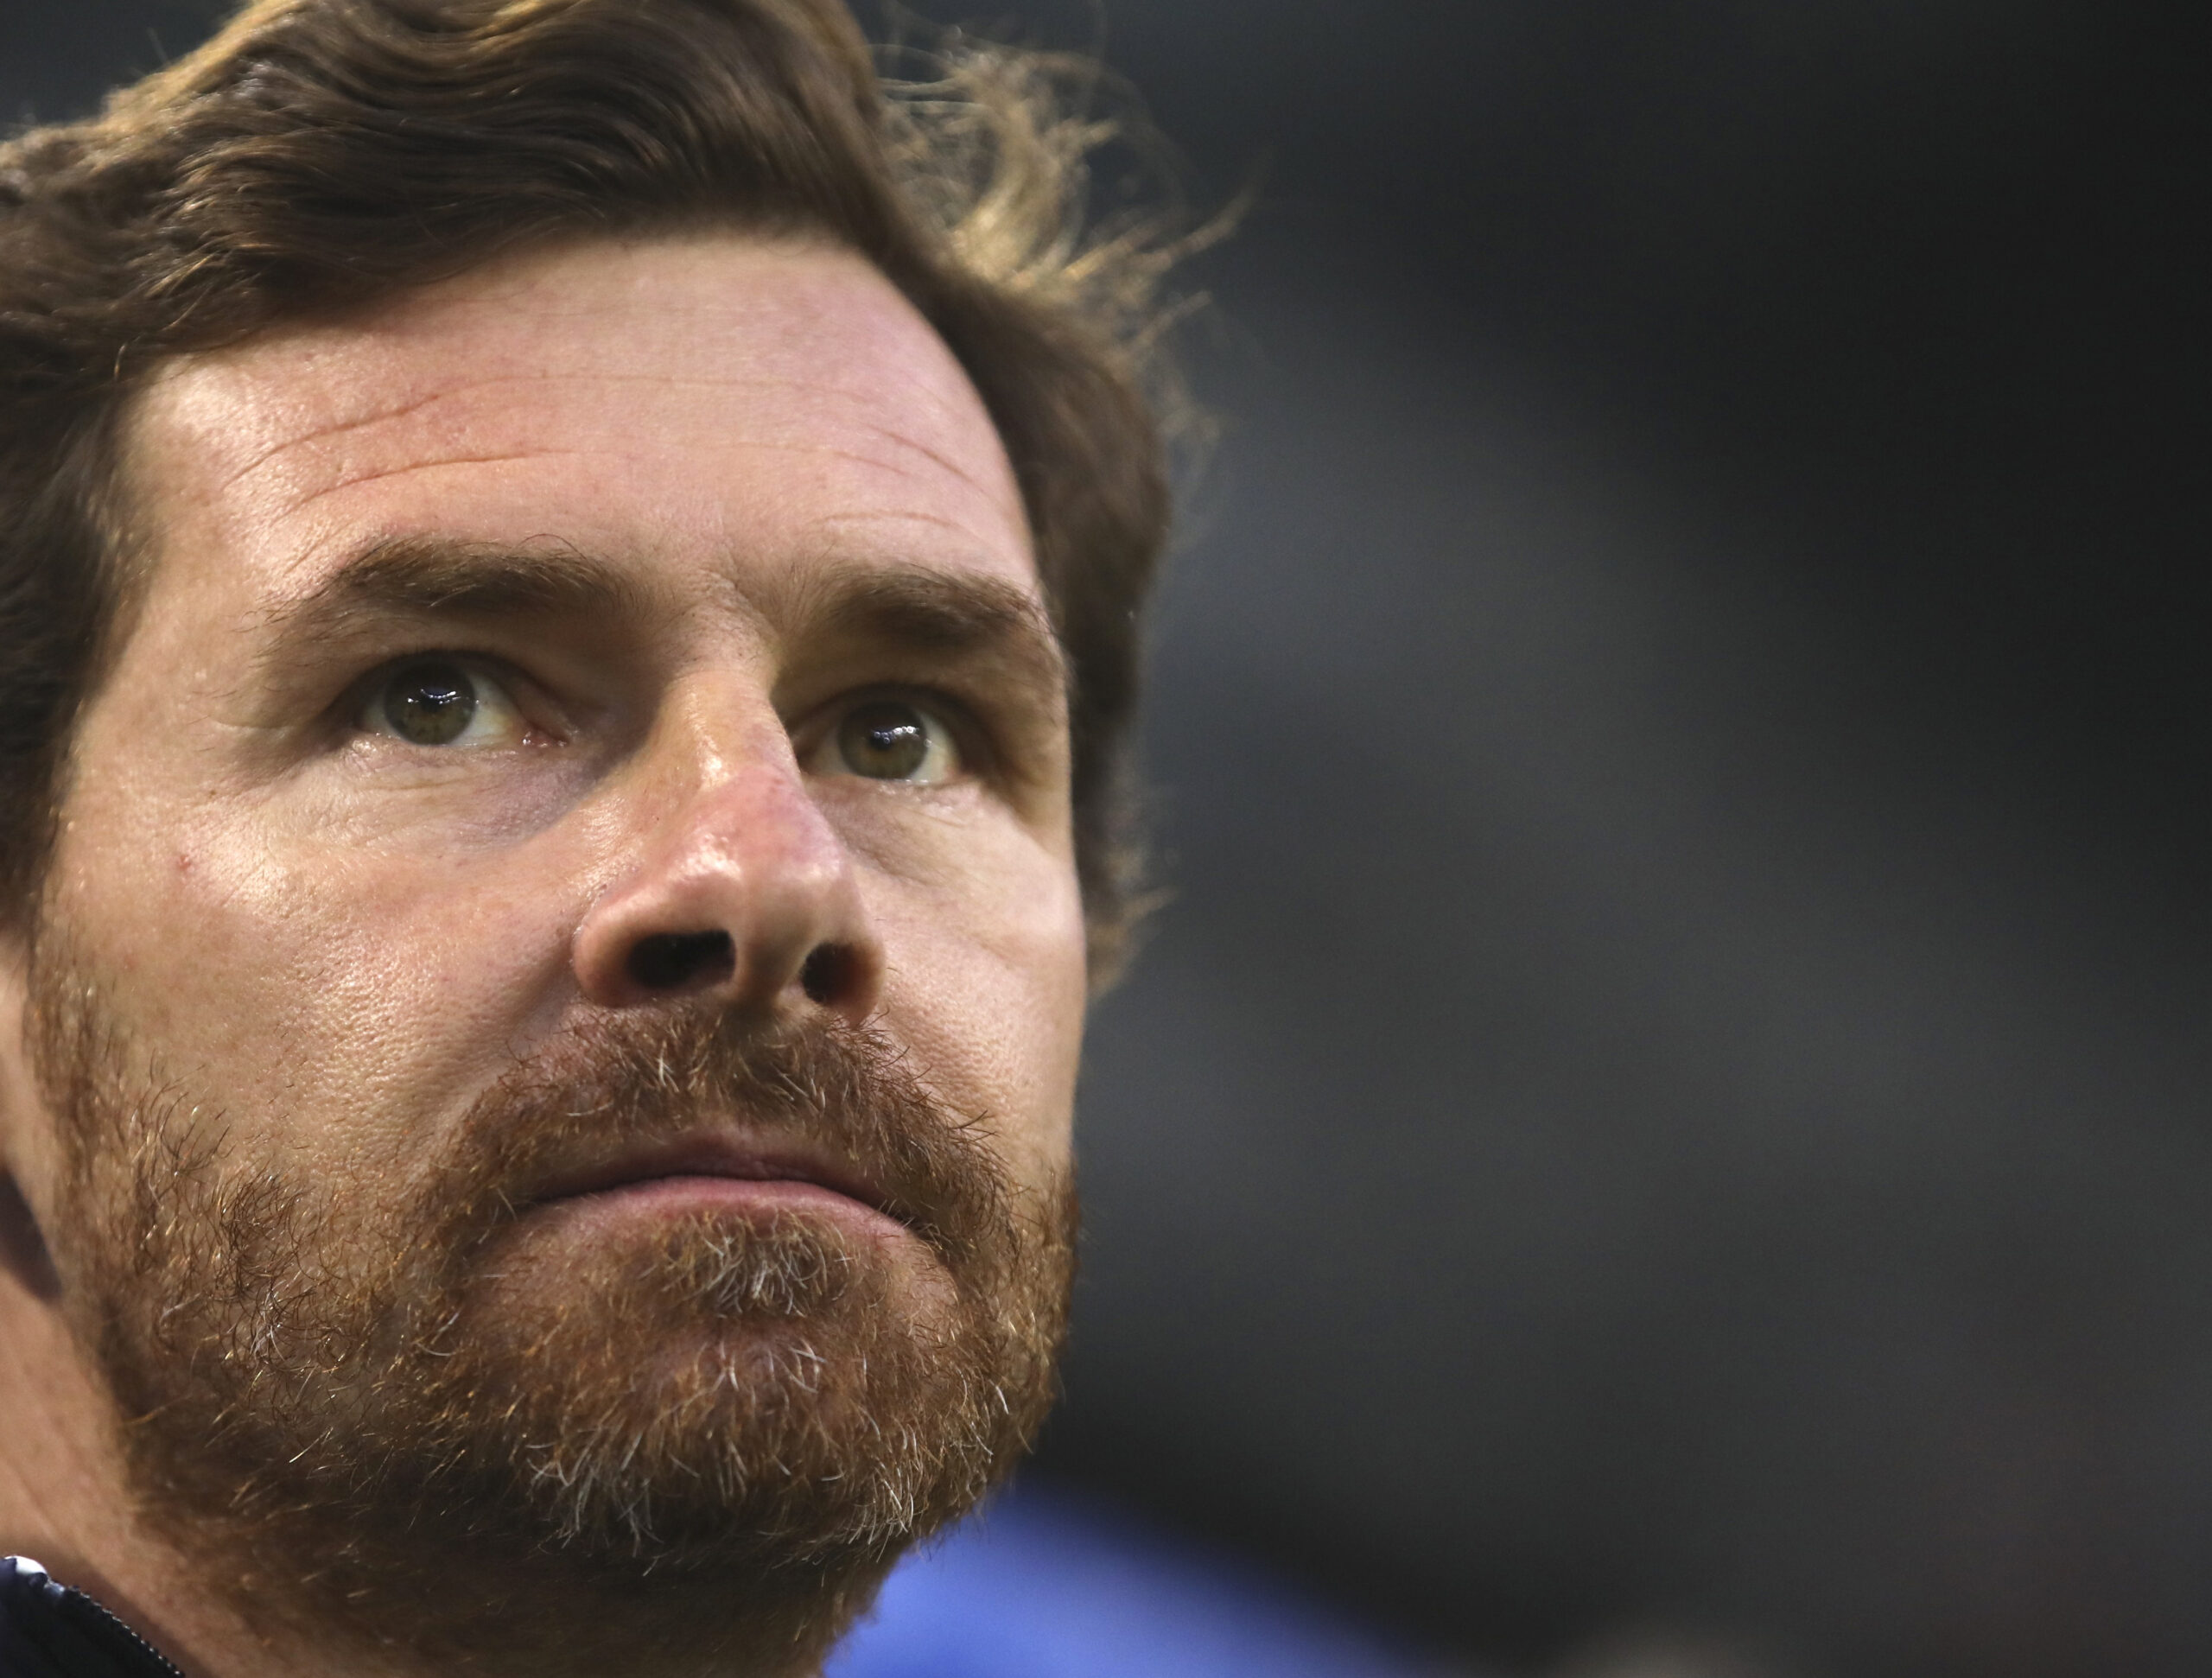 FILE - In this Saturday, Jan.25, 2020 file photo, Marseille's head coach Andre Villas-Boas stands on the touchline ahead of the French League One soccer match between Marseille and Angers at the Stade Velodrome in Marseille, France. Having been the only among Europe's top five leagues to finish early because of the coronavirus pandemic, the French league is the first to restart on Friday, Aug. 21, 2020. (AP Photo/Daniel Cole, File)